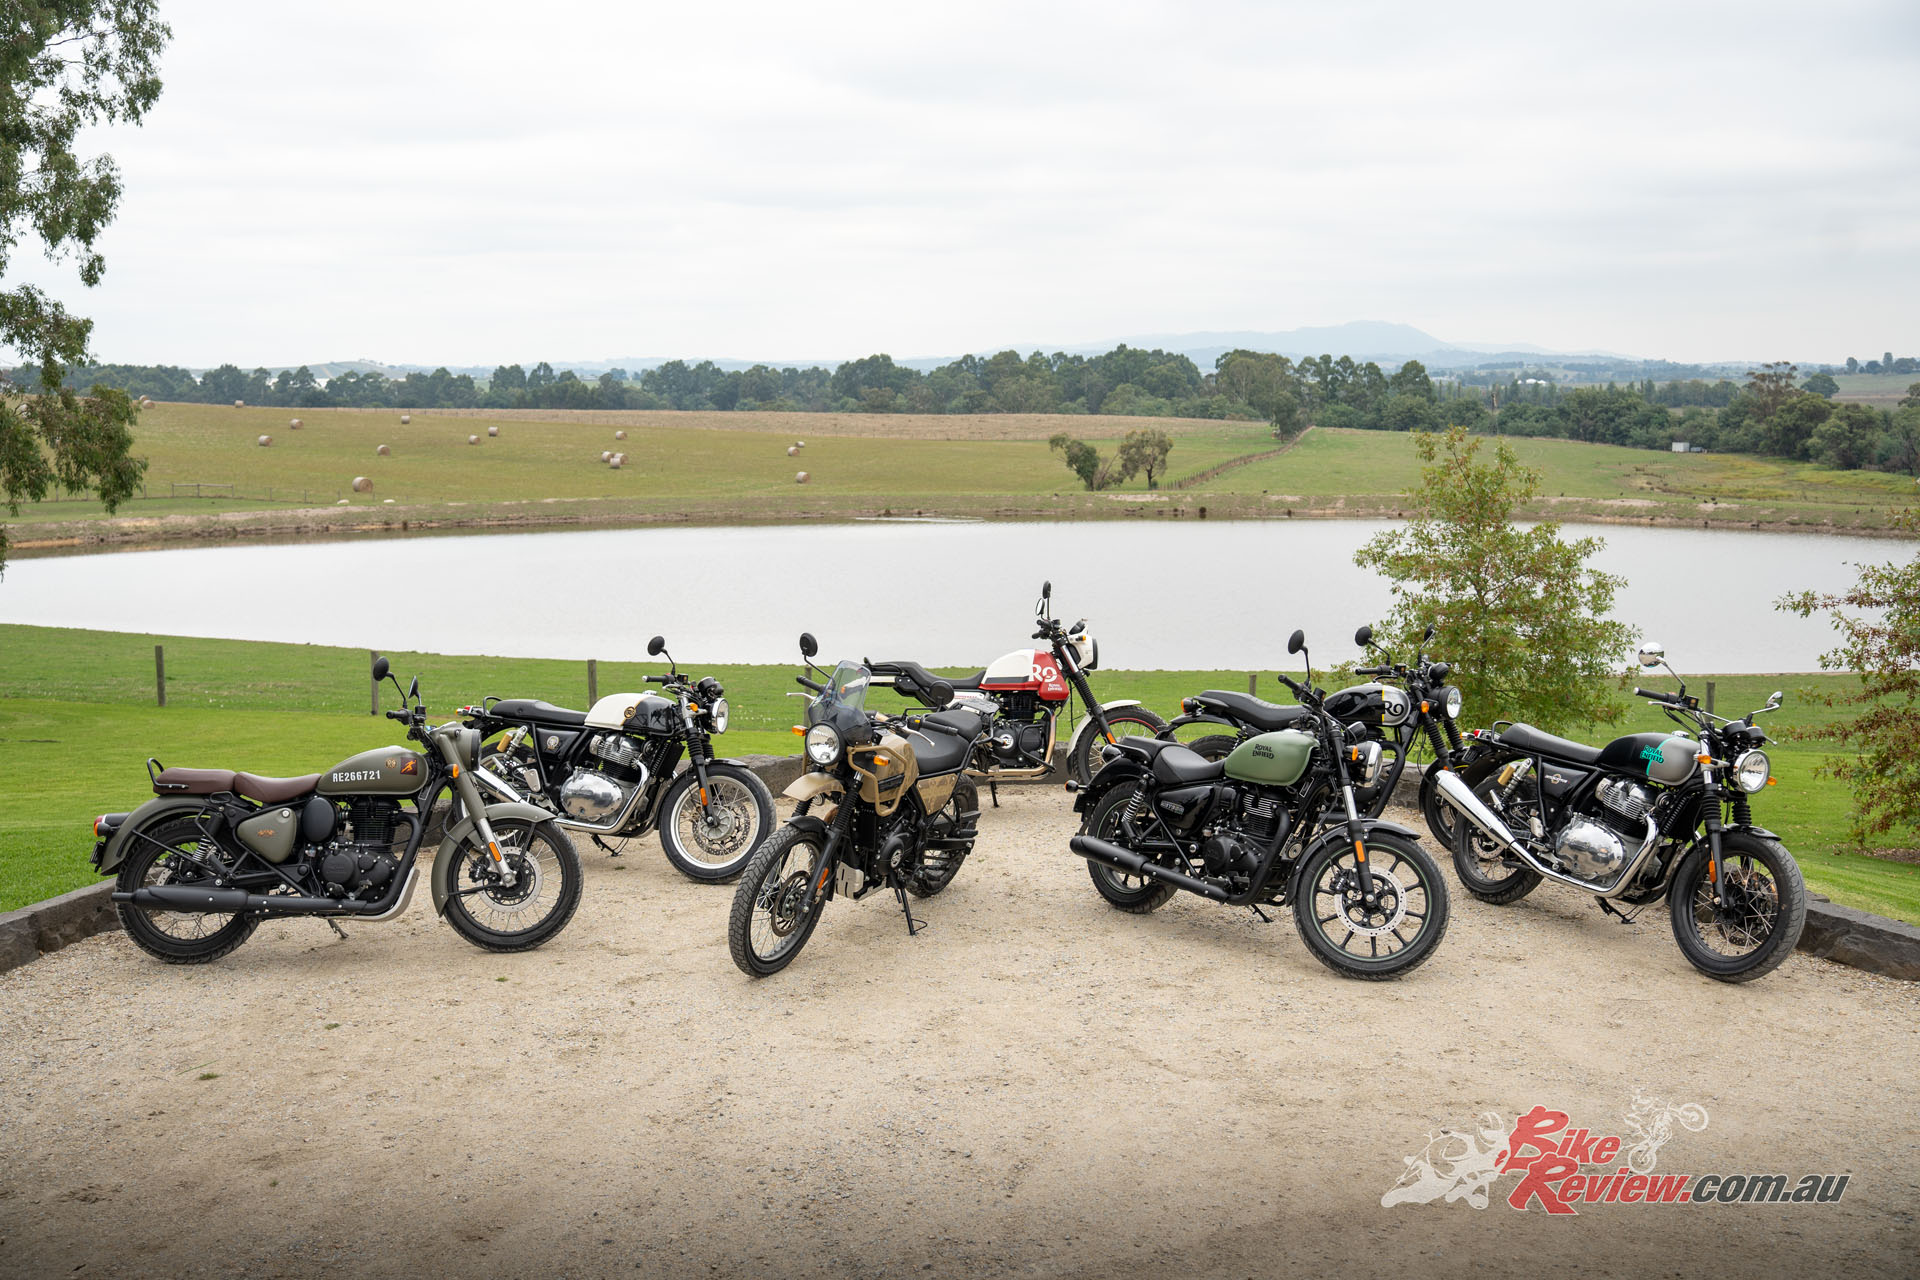 Royal Enfield threw a “Ride The Range” day for the Australian press, check out which bike Zane enjoyed the most!